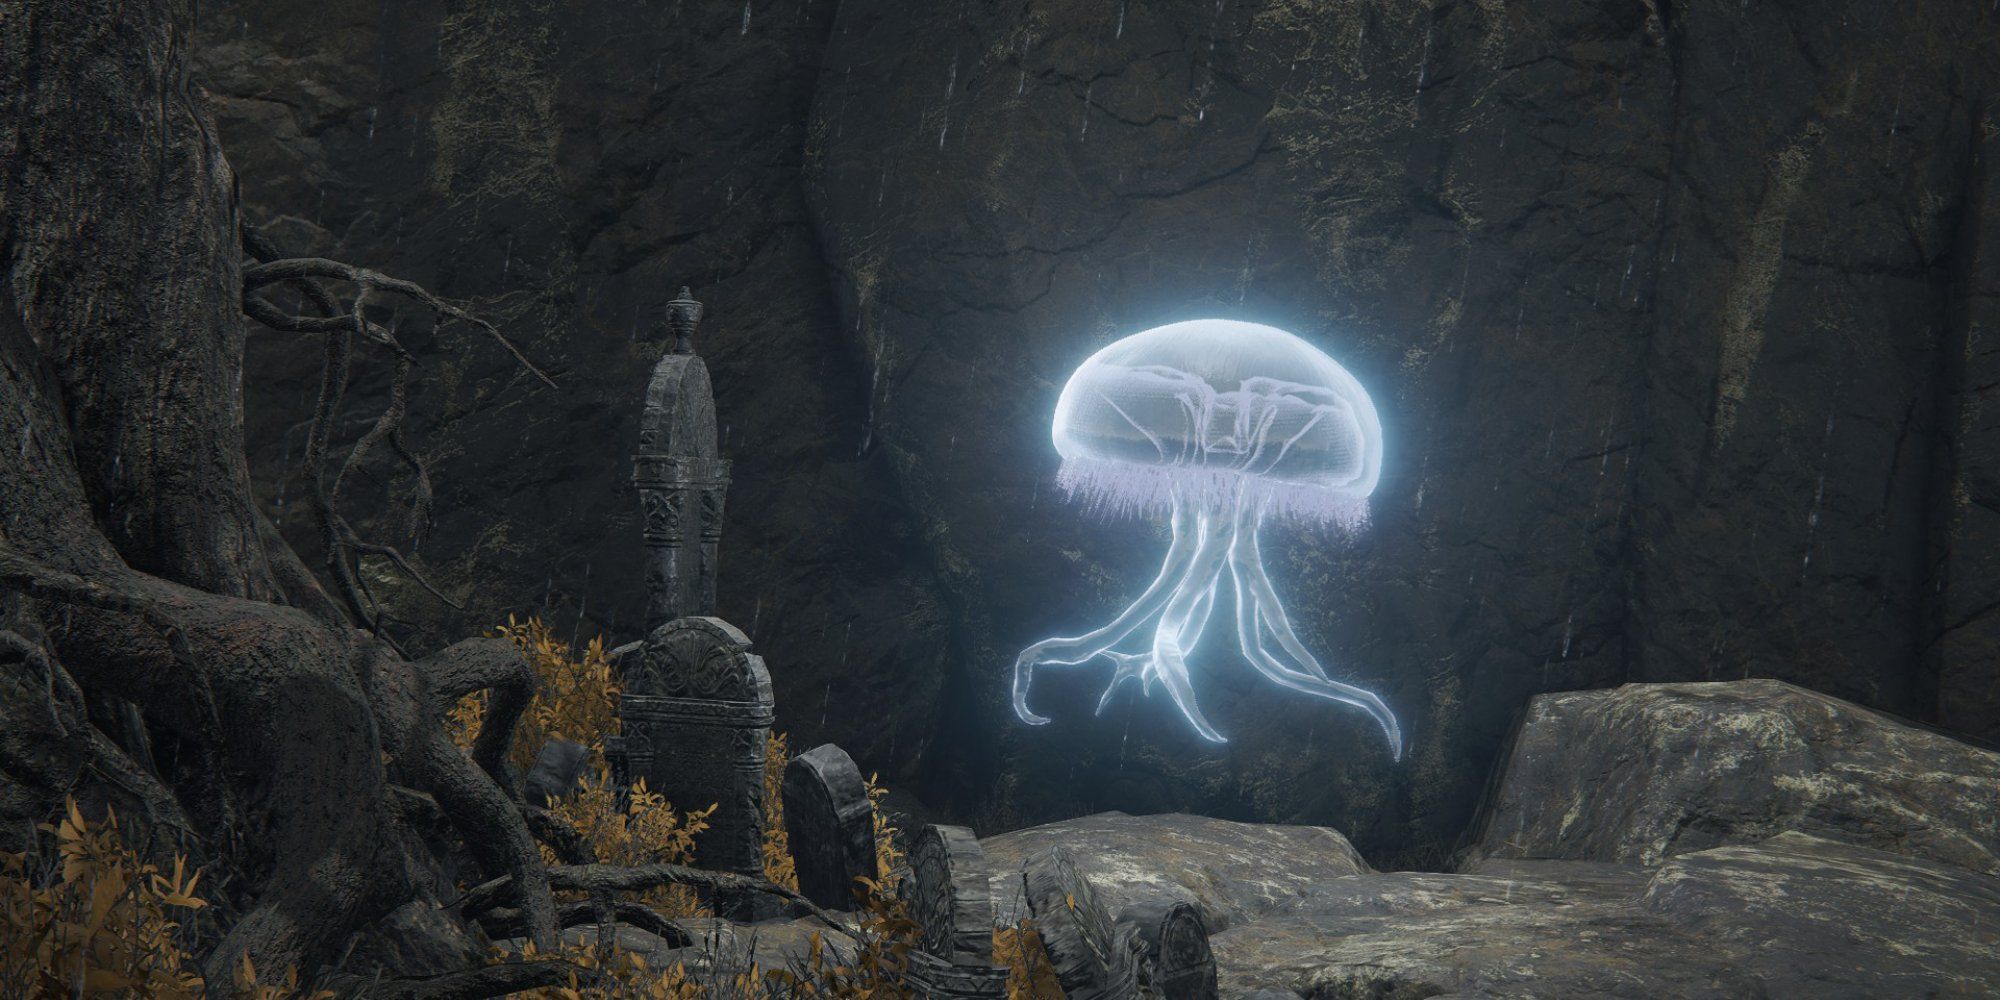 Screenshot of Elden Ring showing a spirit jellyfish by a grave.